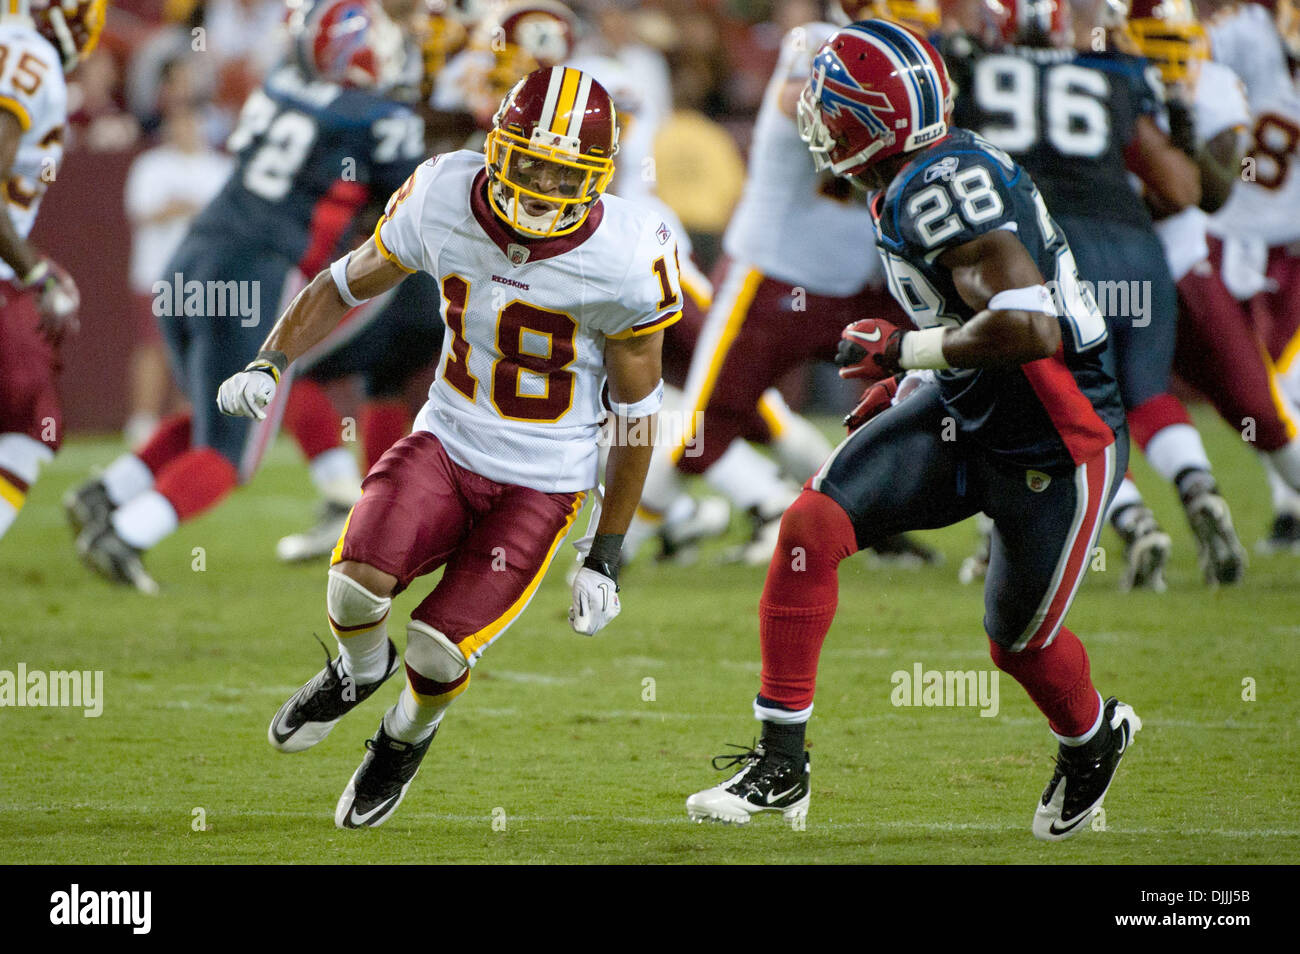 Aug. 13, 2010 - Landover, Maryland, United States of America - 13 August, 2010: Washington Redskins Wide Receiver TERRENCE AUSTIN (#18) tried to evade Buffalo Bills Cornerback LEODIS MCKELVIN (#28) during the second quarter of their preseason game at FedEx Field in Landover, MD..Mandatory Credit: Rassi Borneo / Southcreek Global (Credit Image: Â© Southcreek Global/ZUMApress.com) Stock Photo